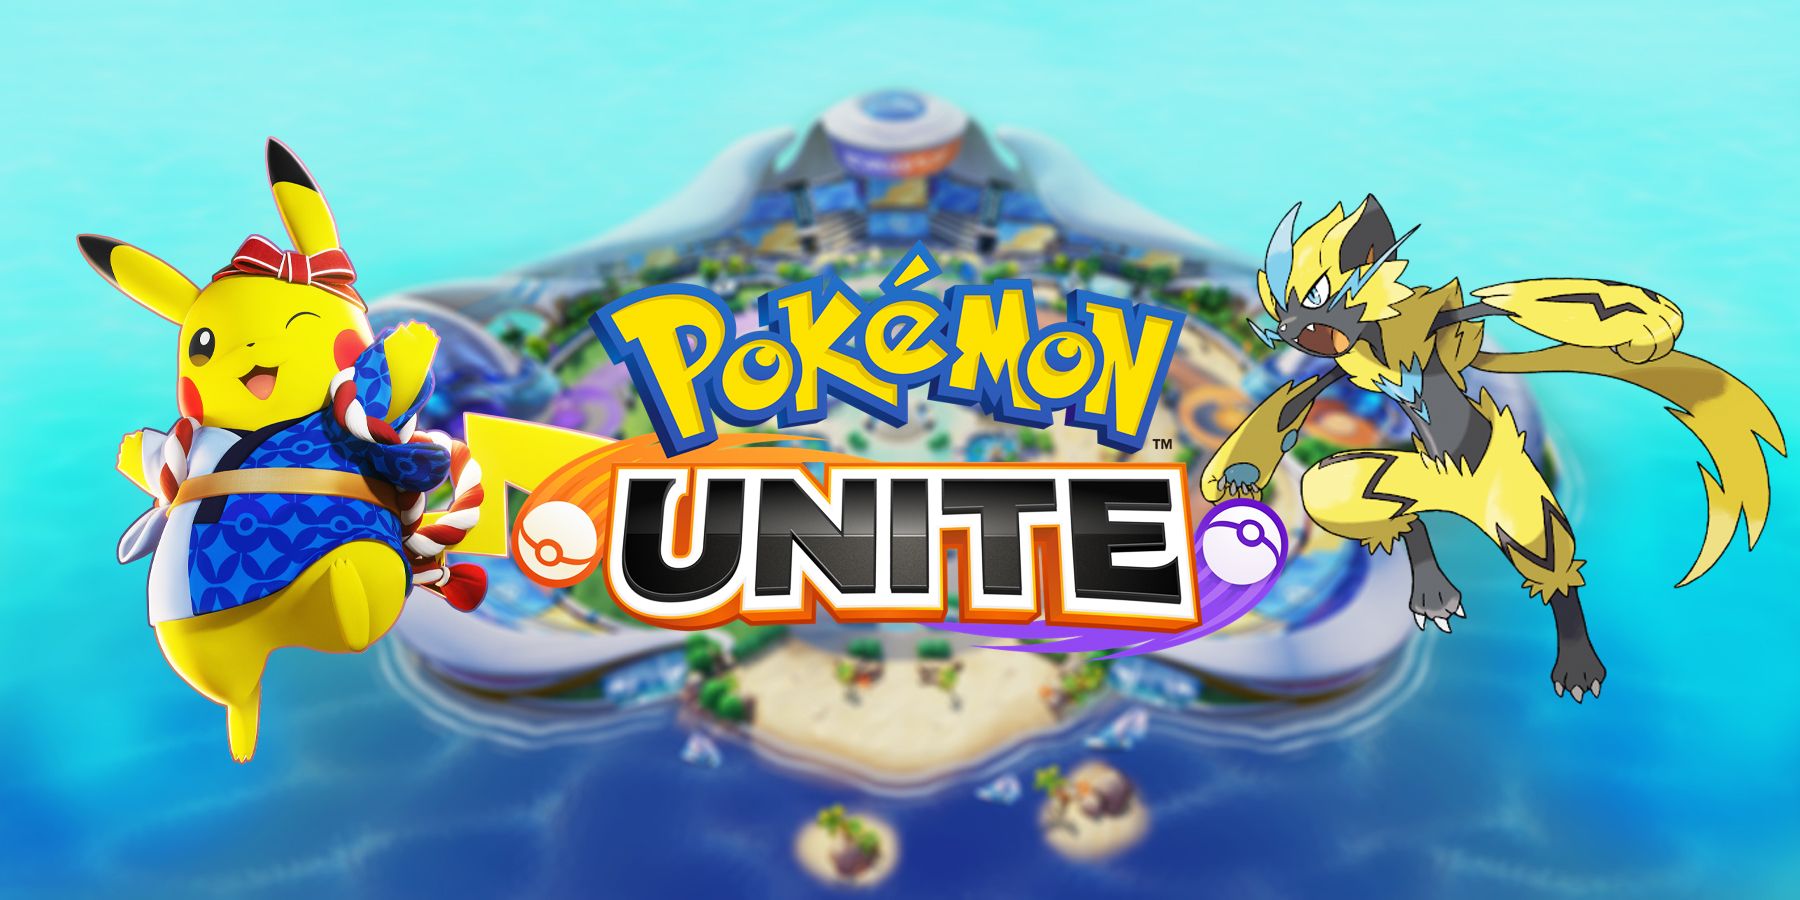 The Pokemon Unite logo is in the center with Pikachu in its Festival Style Holowear on the left and Zeraora on the right.